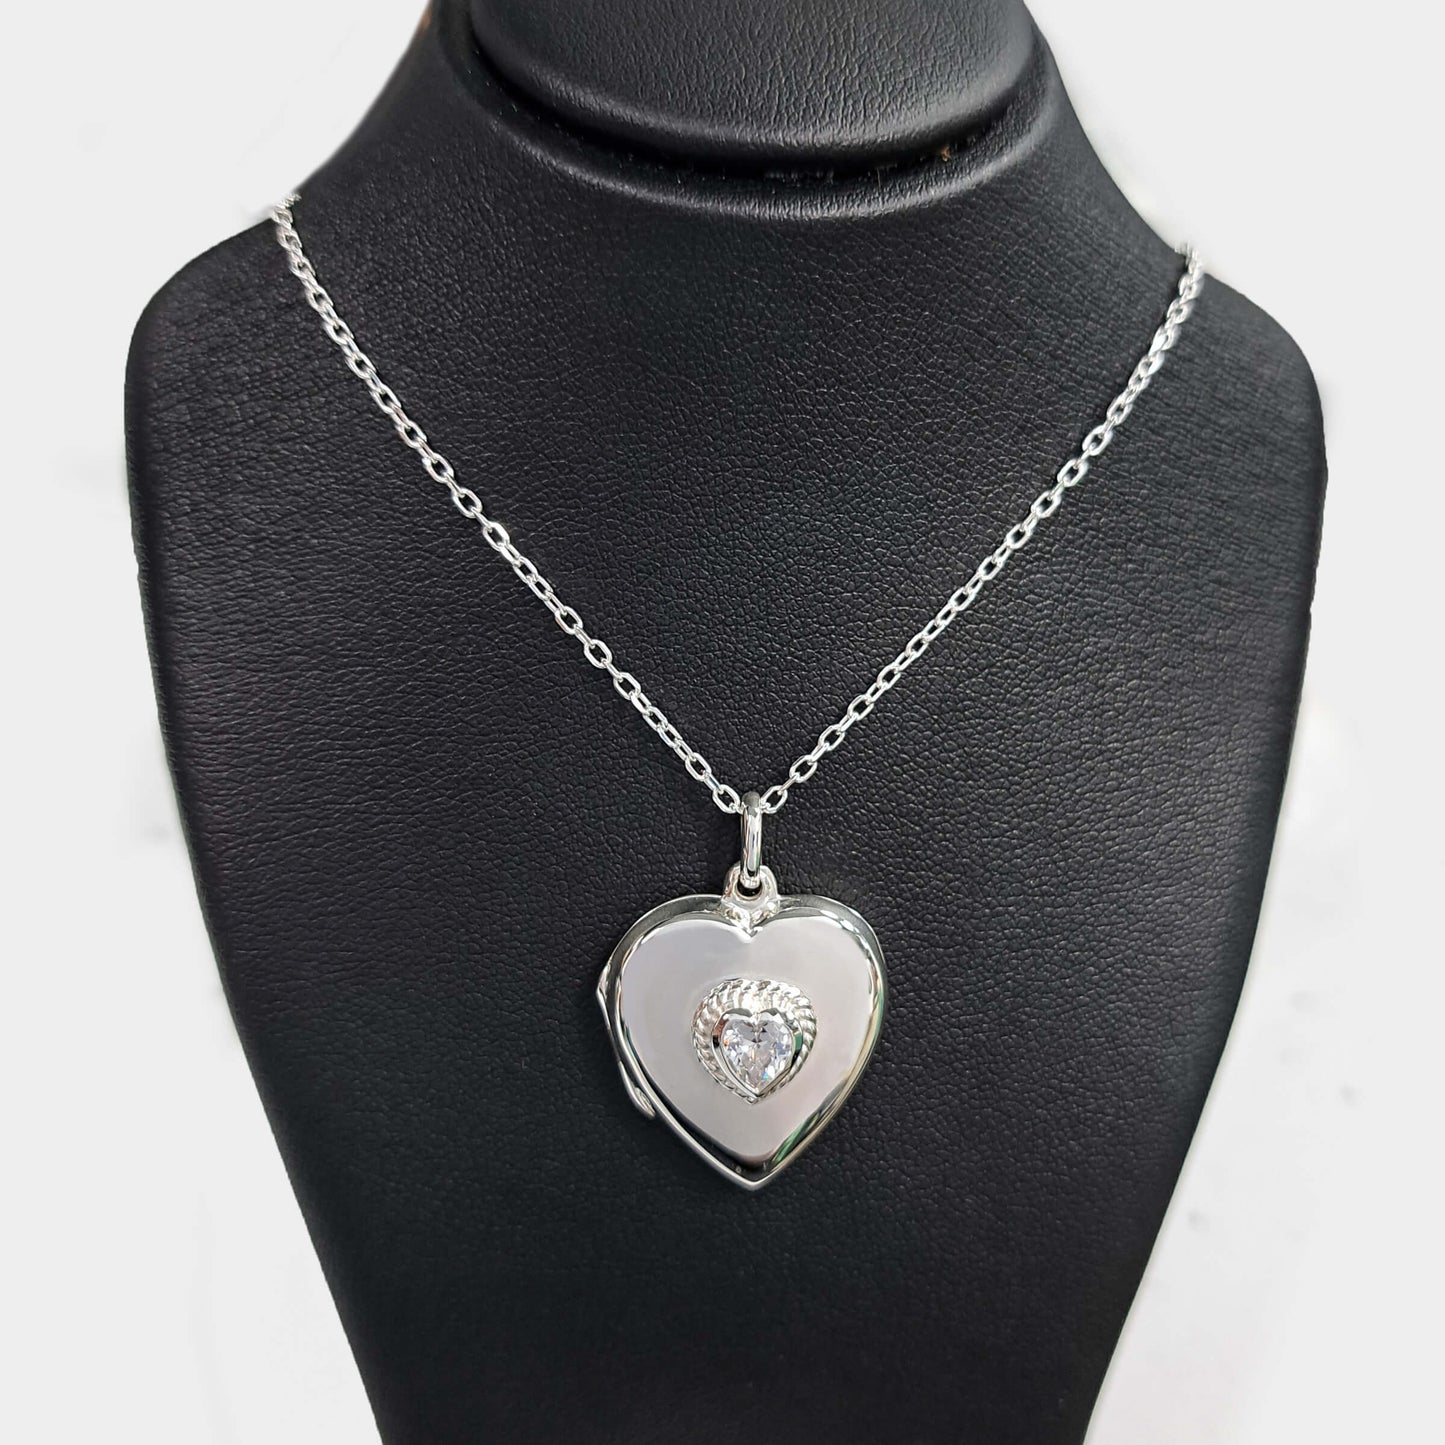 Heart-shaped chain and locket necklace with cubic zirconia inset